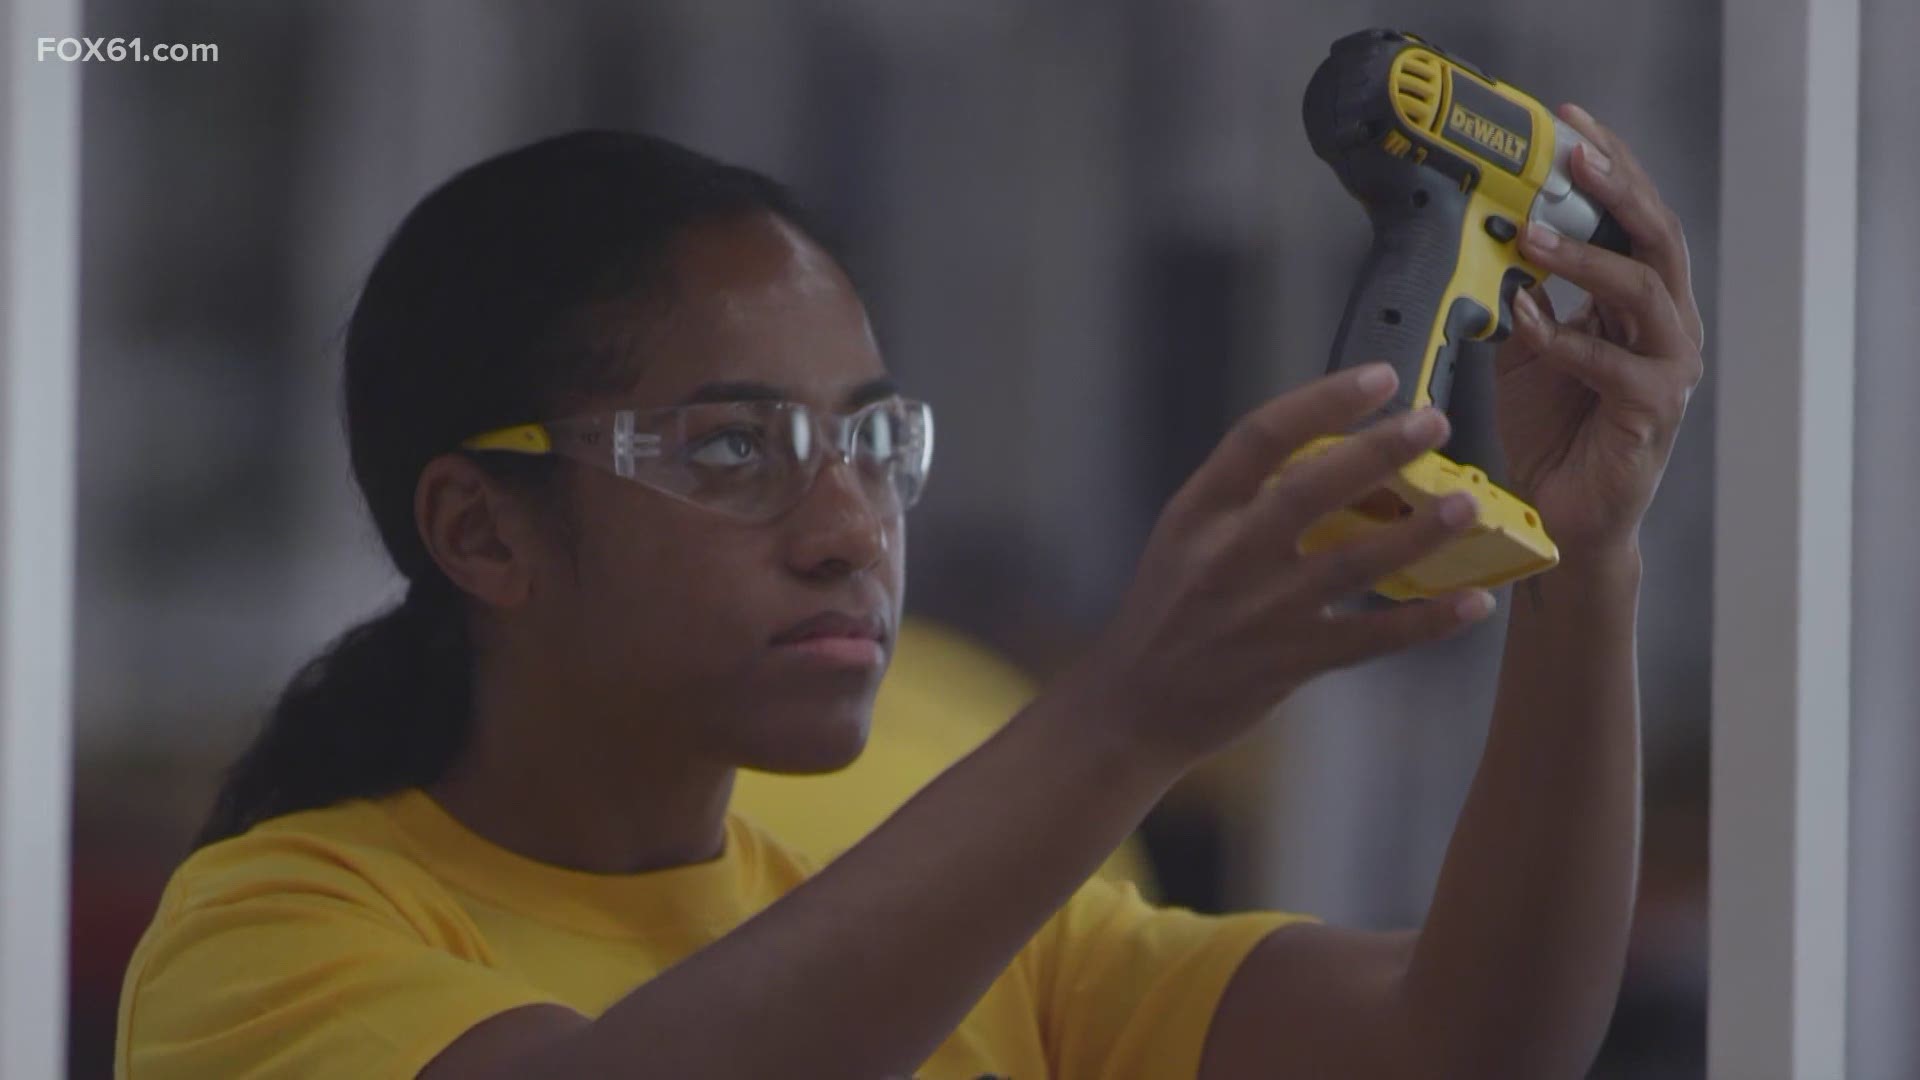 The campaign expands upon Stanley Black & Decker’s Manufactory 4.0, which opened in Hartford to train workers in adopting cutting edge technology.